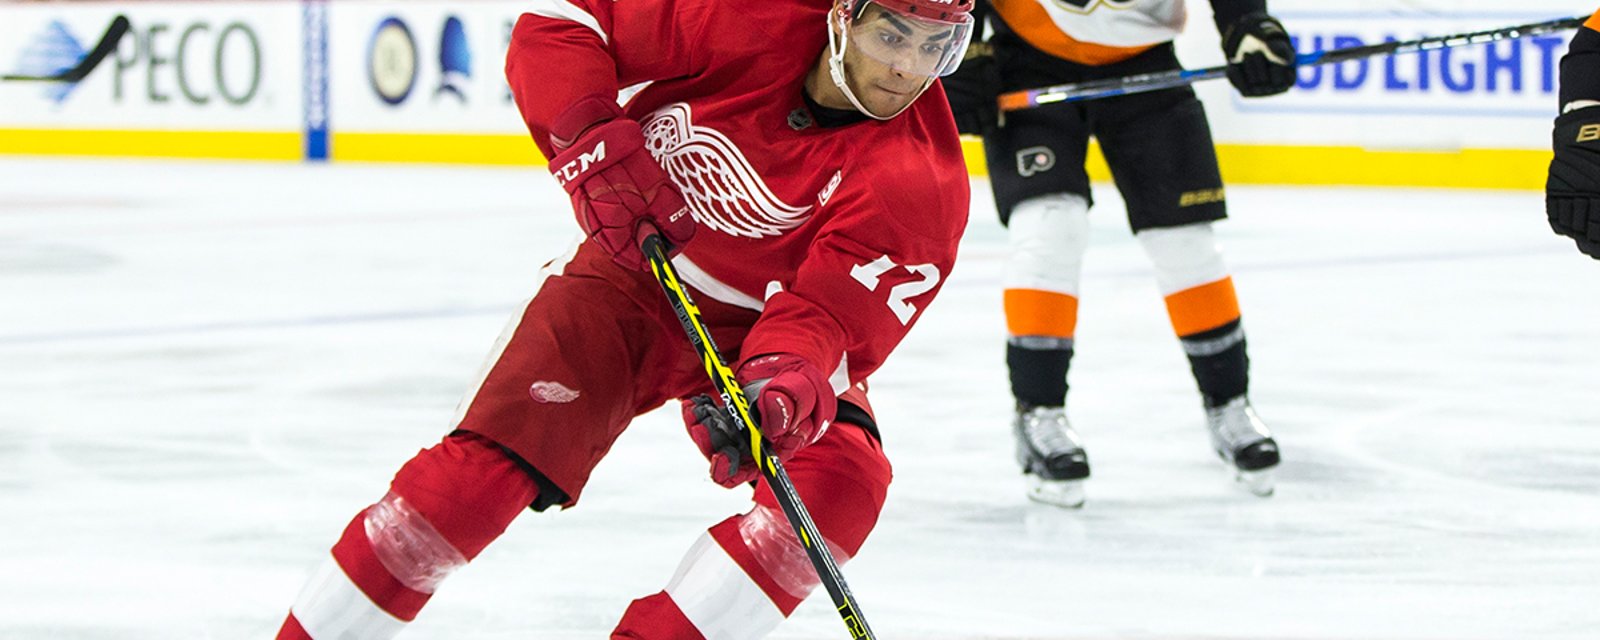 Report: Athanasiou comes up empty handed in Europe